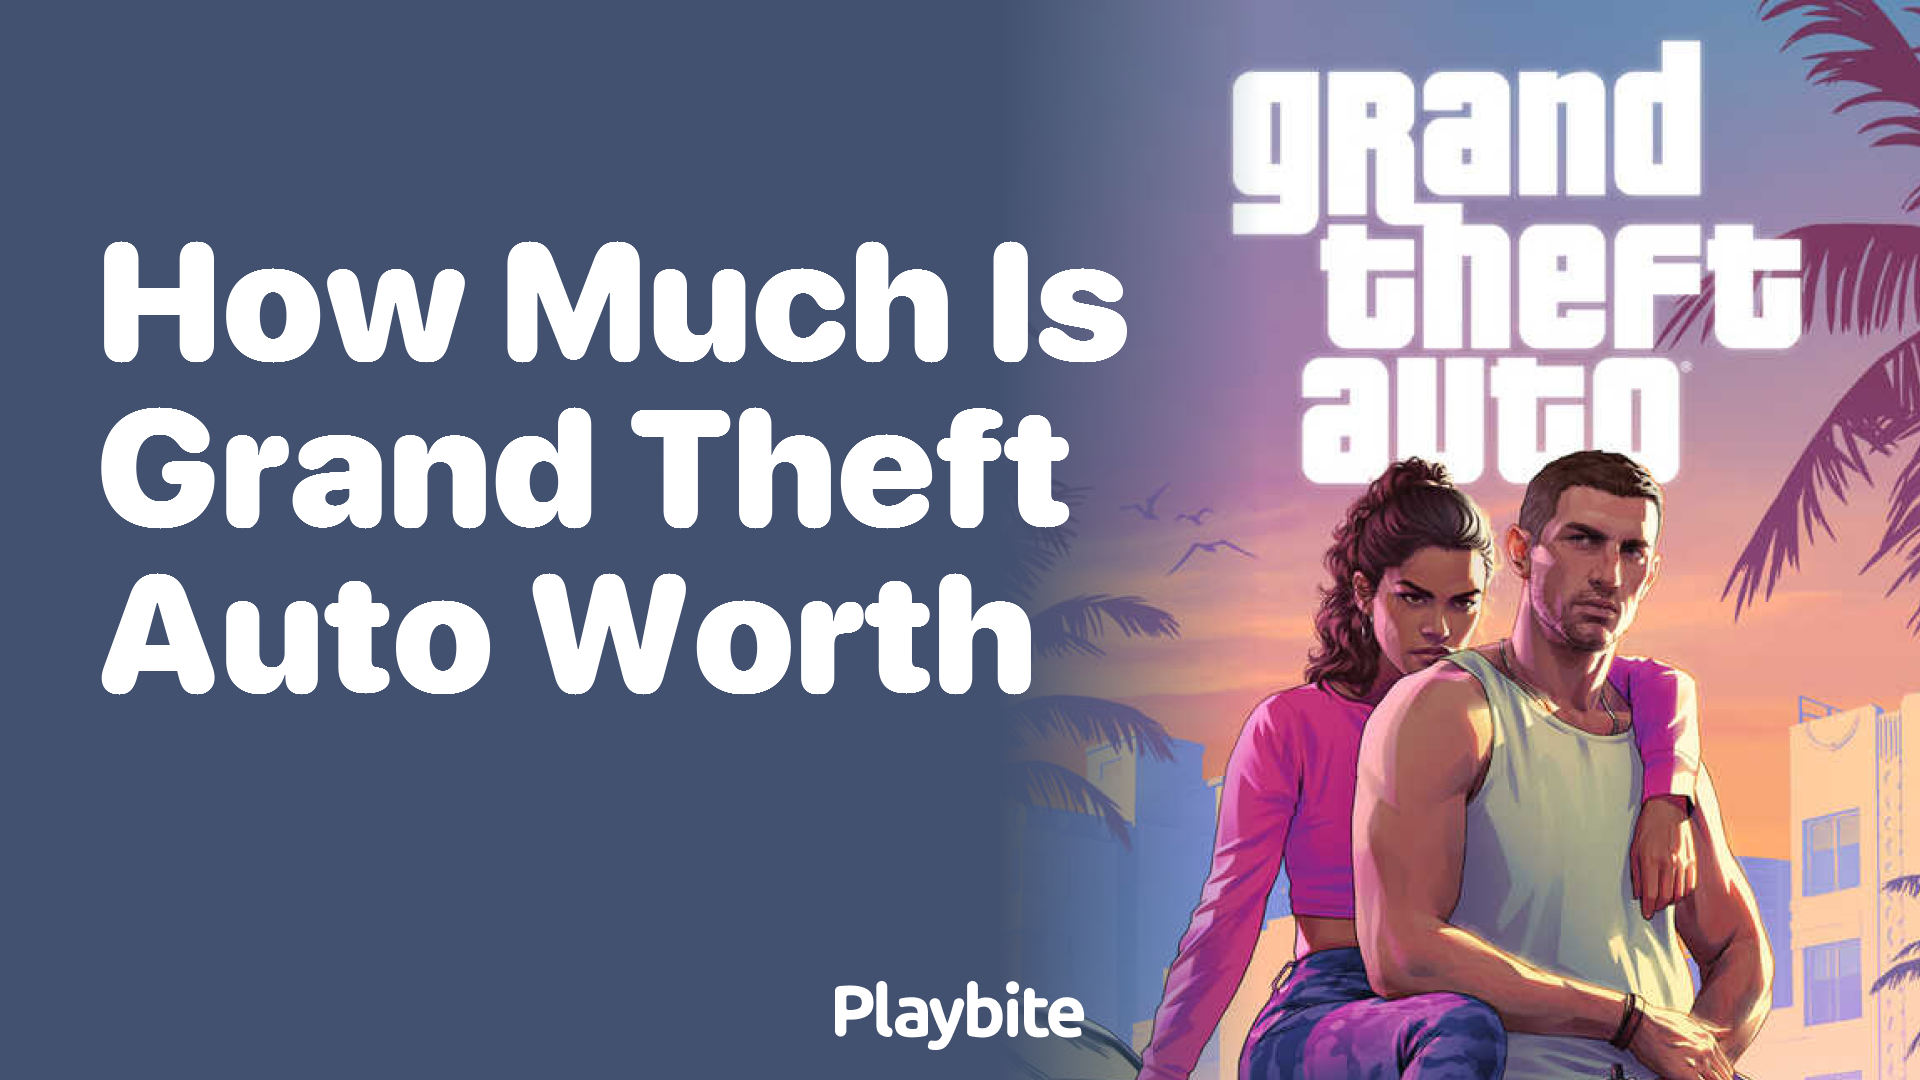 How much is Grand Theft Auto worth?